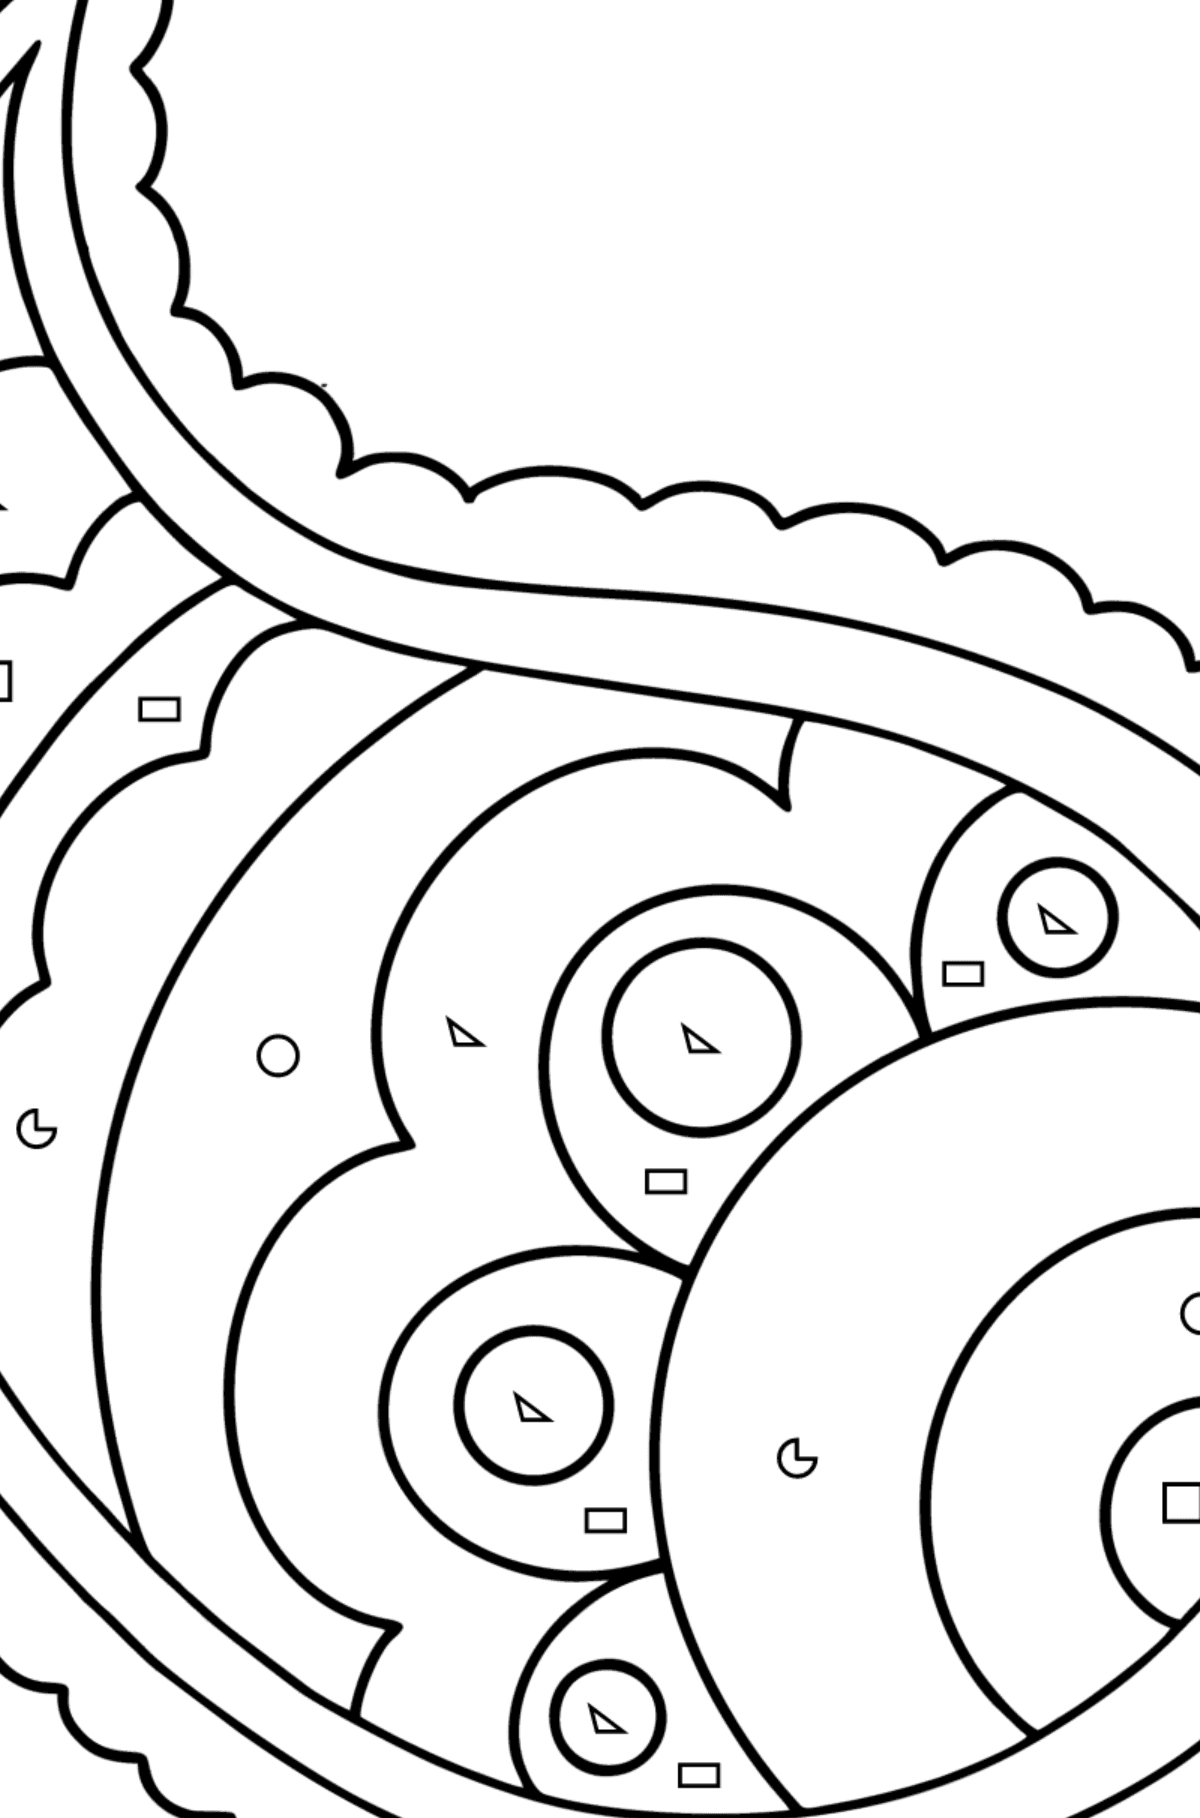 Paisley coloring page - 17 Elements - Coloring by Geometric Shapes for Kids